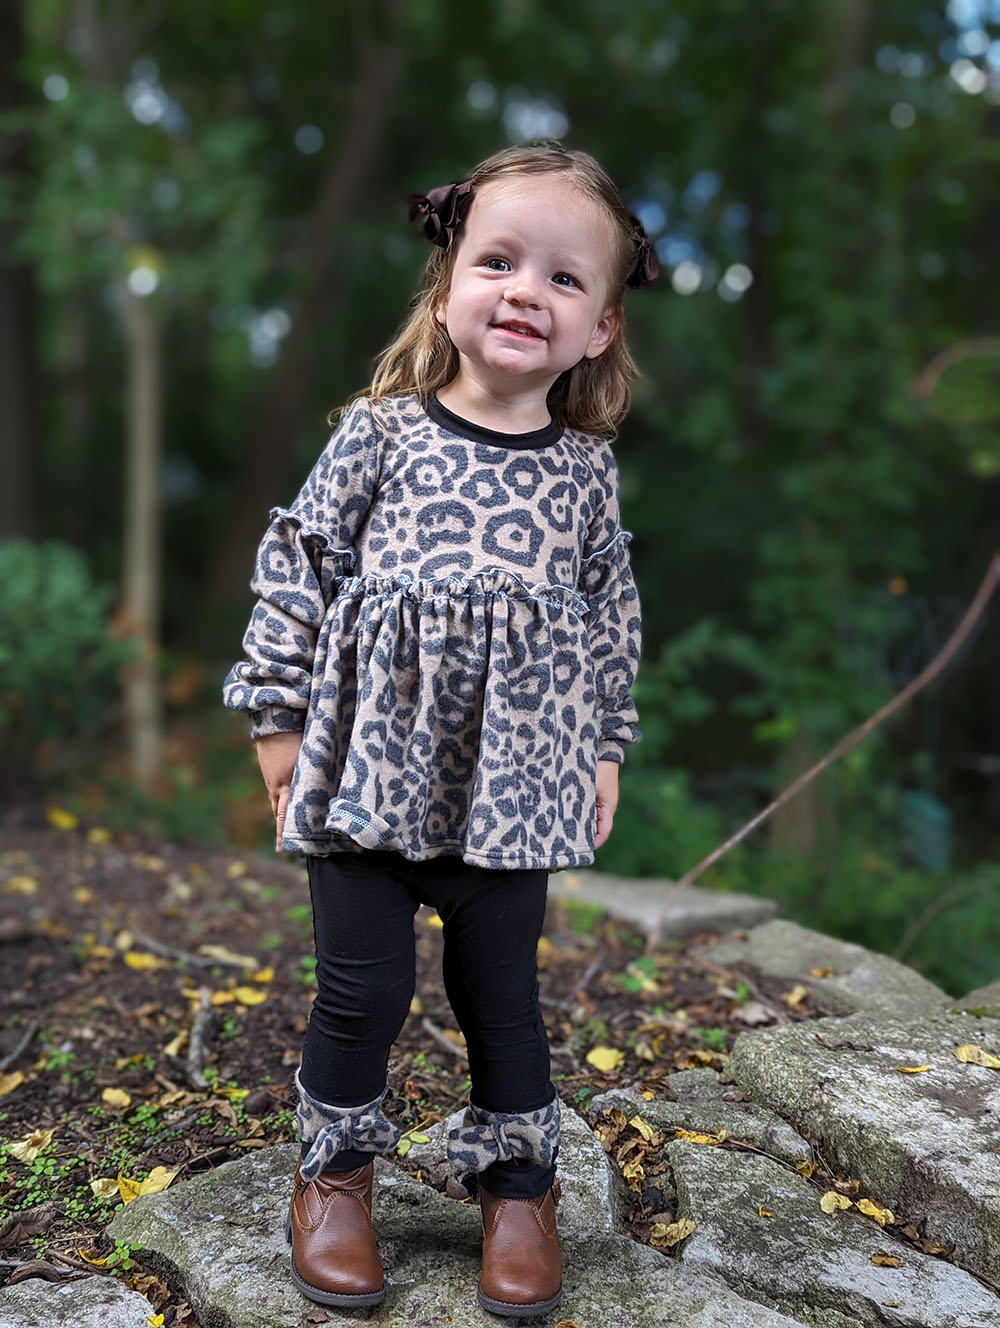 Constance’s Comfy Top Sizes 2T to 14 Kids PDF Pattern